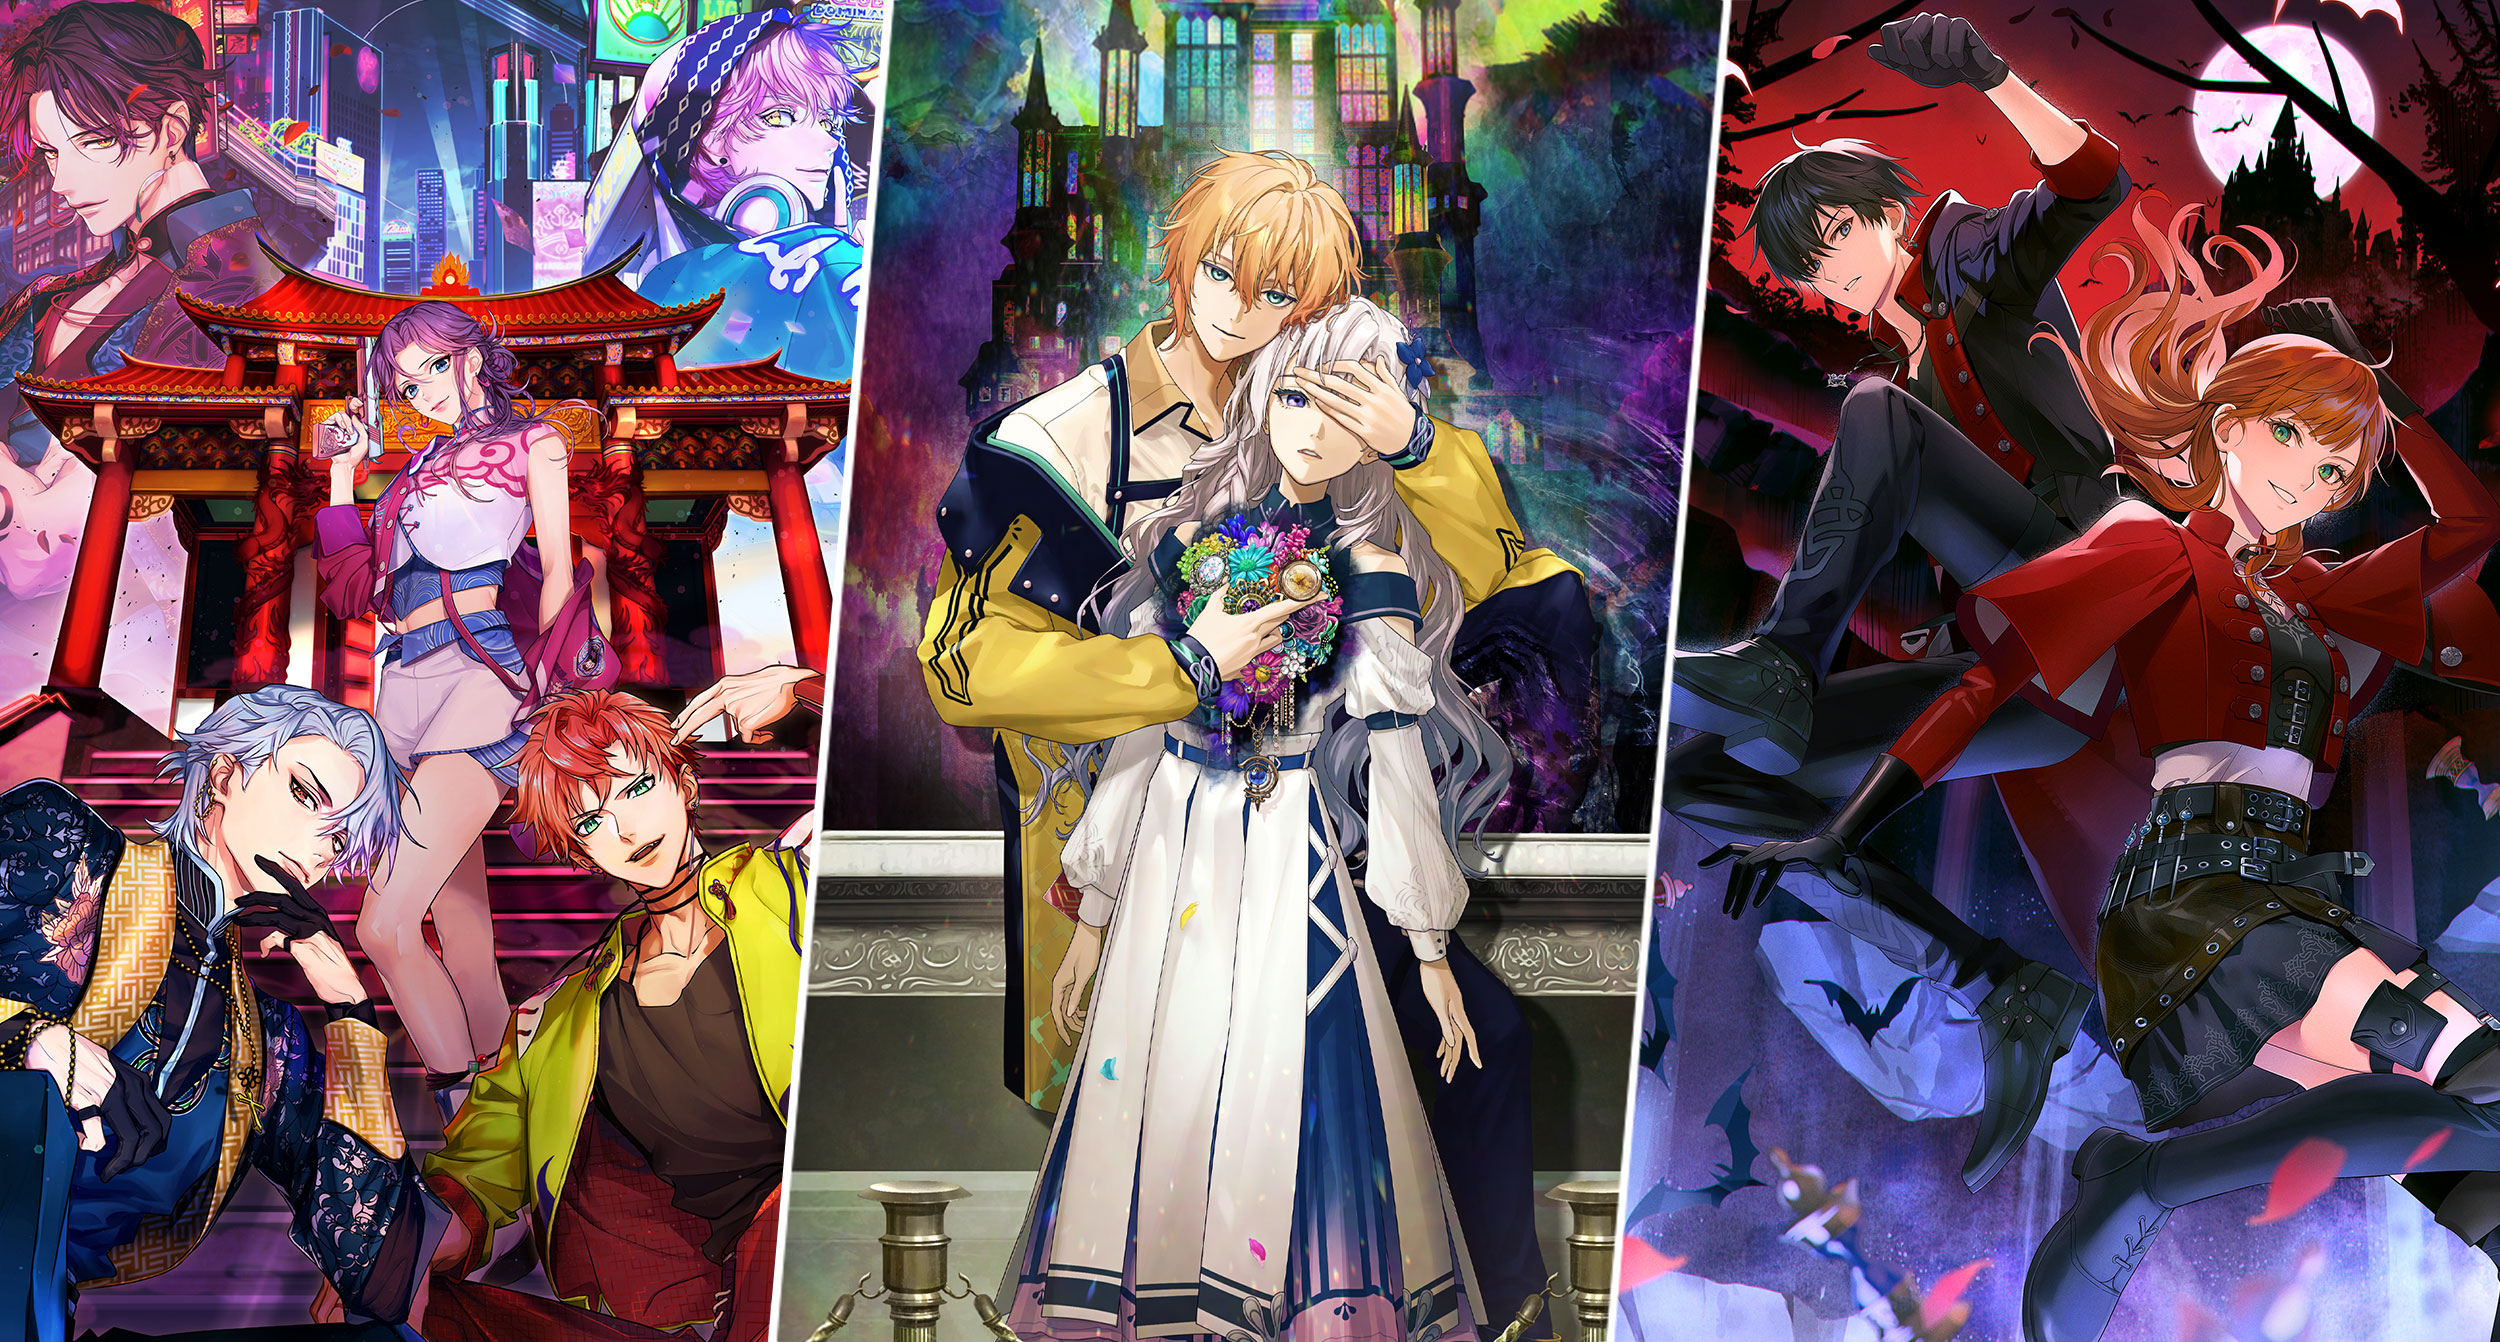 #
      Voltage announces otome visual novels Project Code Kaleido Tower, Project Code Neon Mafia, and Project Code Vampire Hunter for Switch